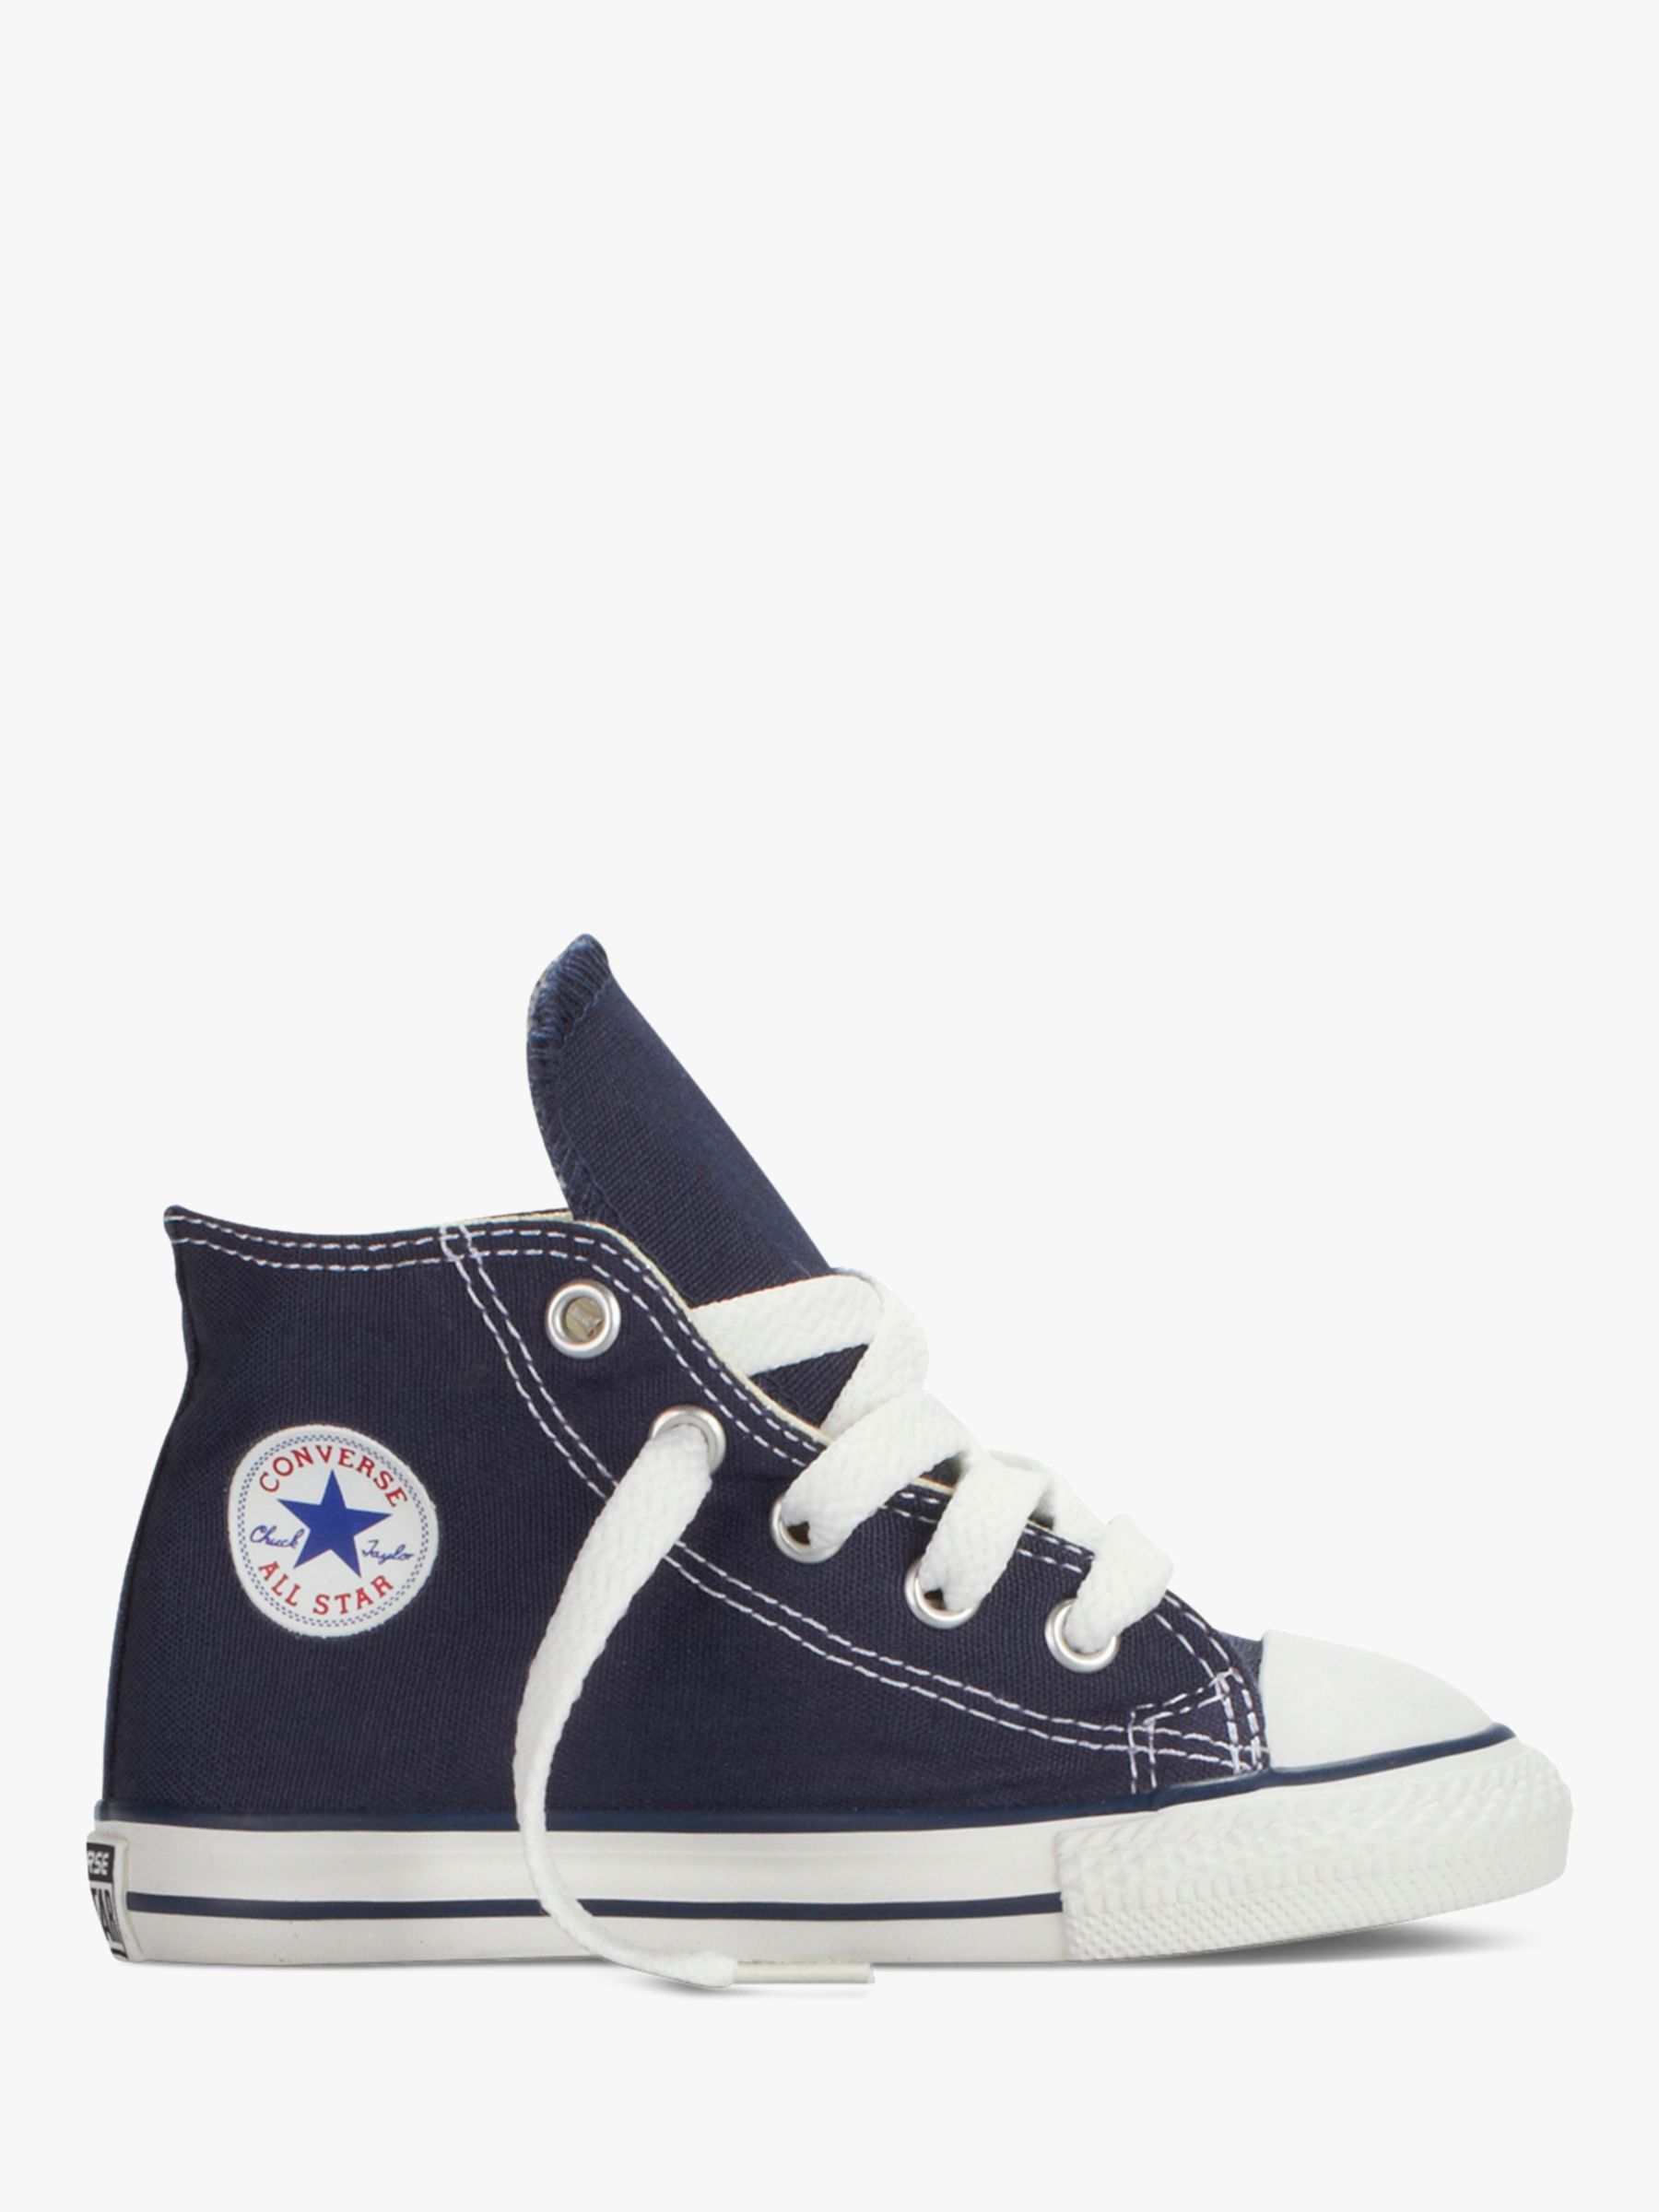 Converse All Star Core-Hi Trainers, Navy, Size 11 Junior